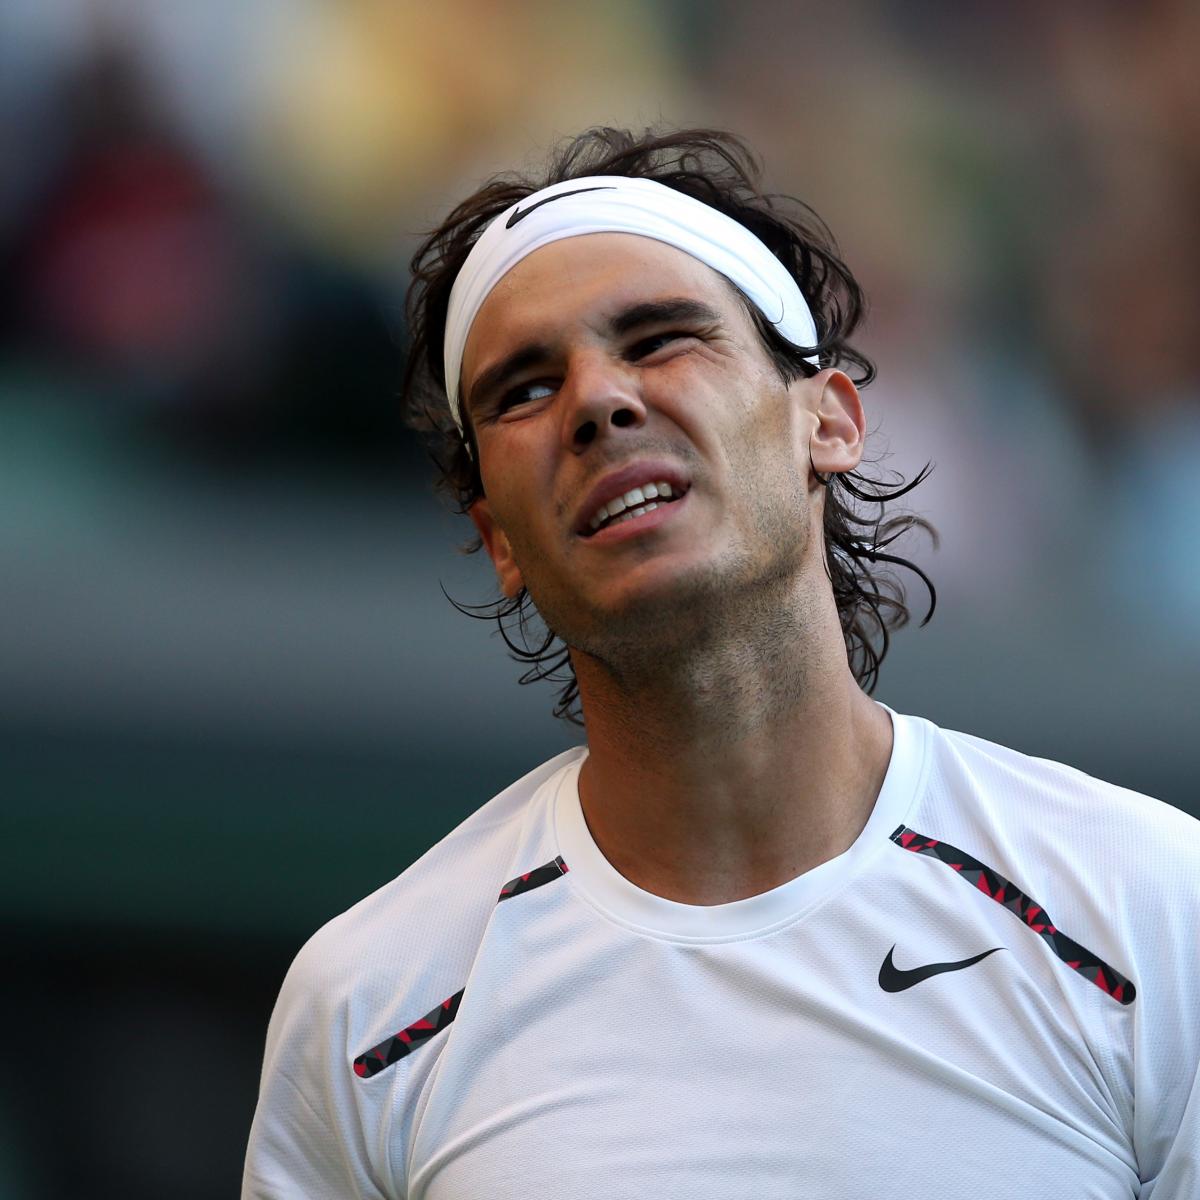 Rafa Nadal Why His Second Round Wimbledon Exit Is Not A Sign Of Things To Come News Scores